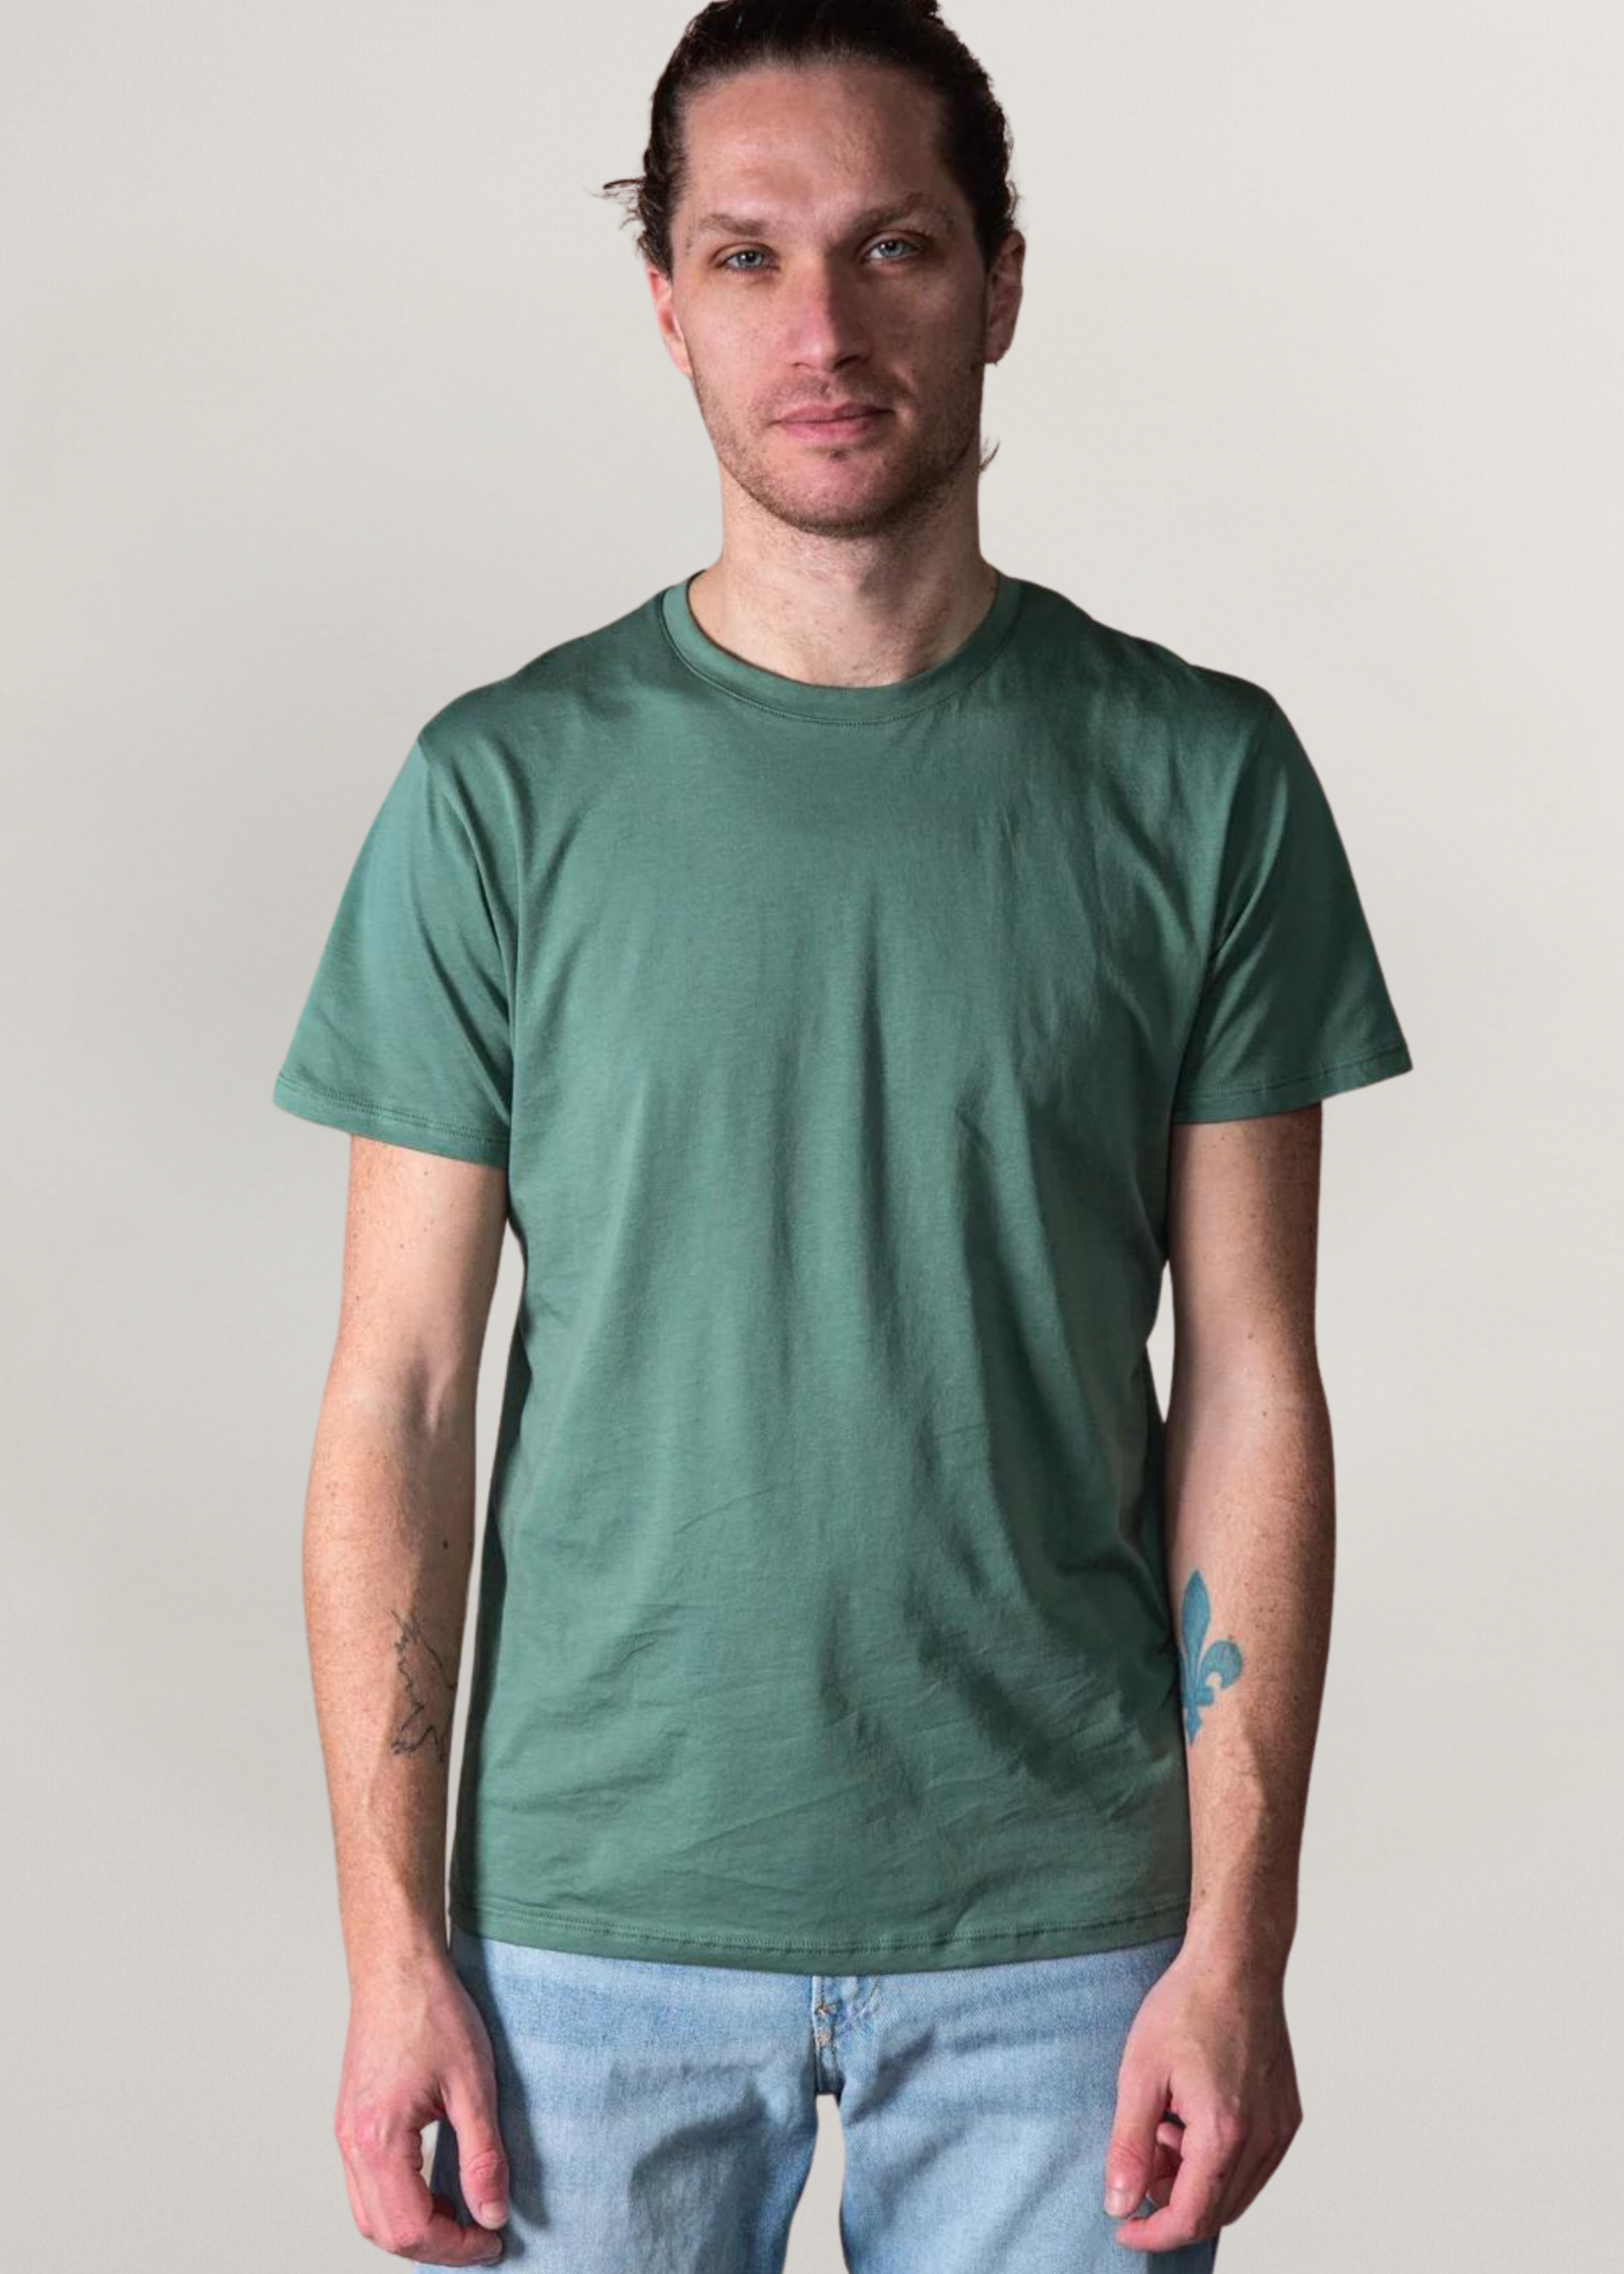 ANONYM APPAREL JULES T-shirt - Forest